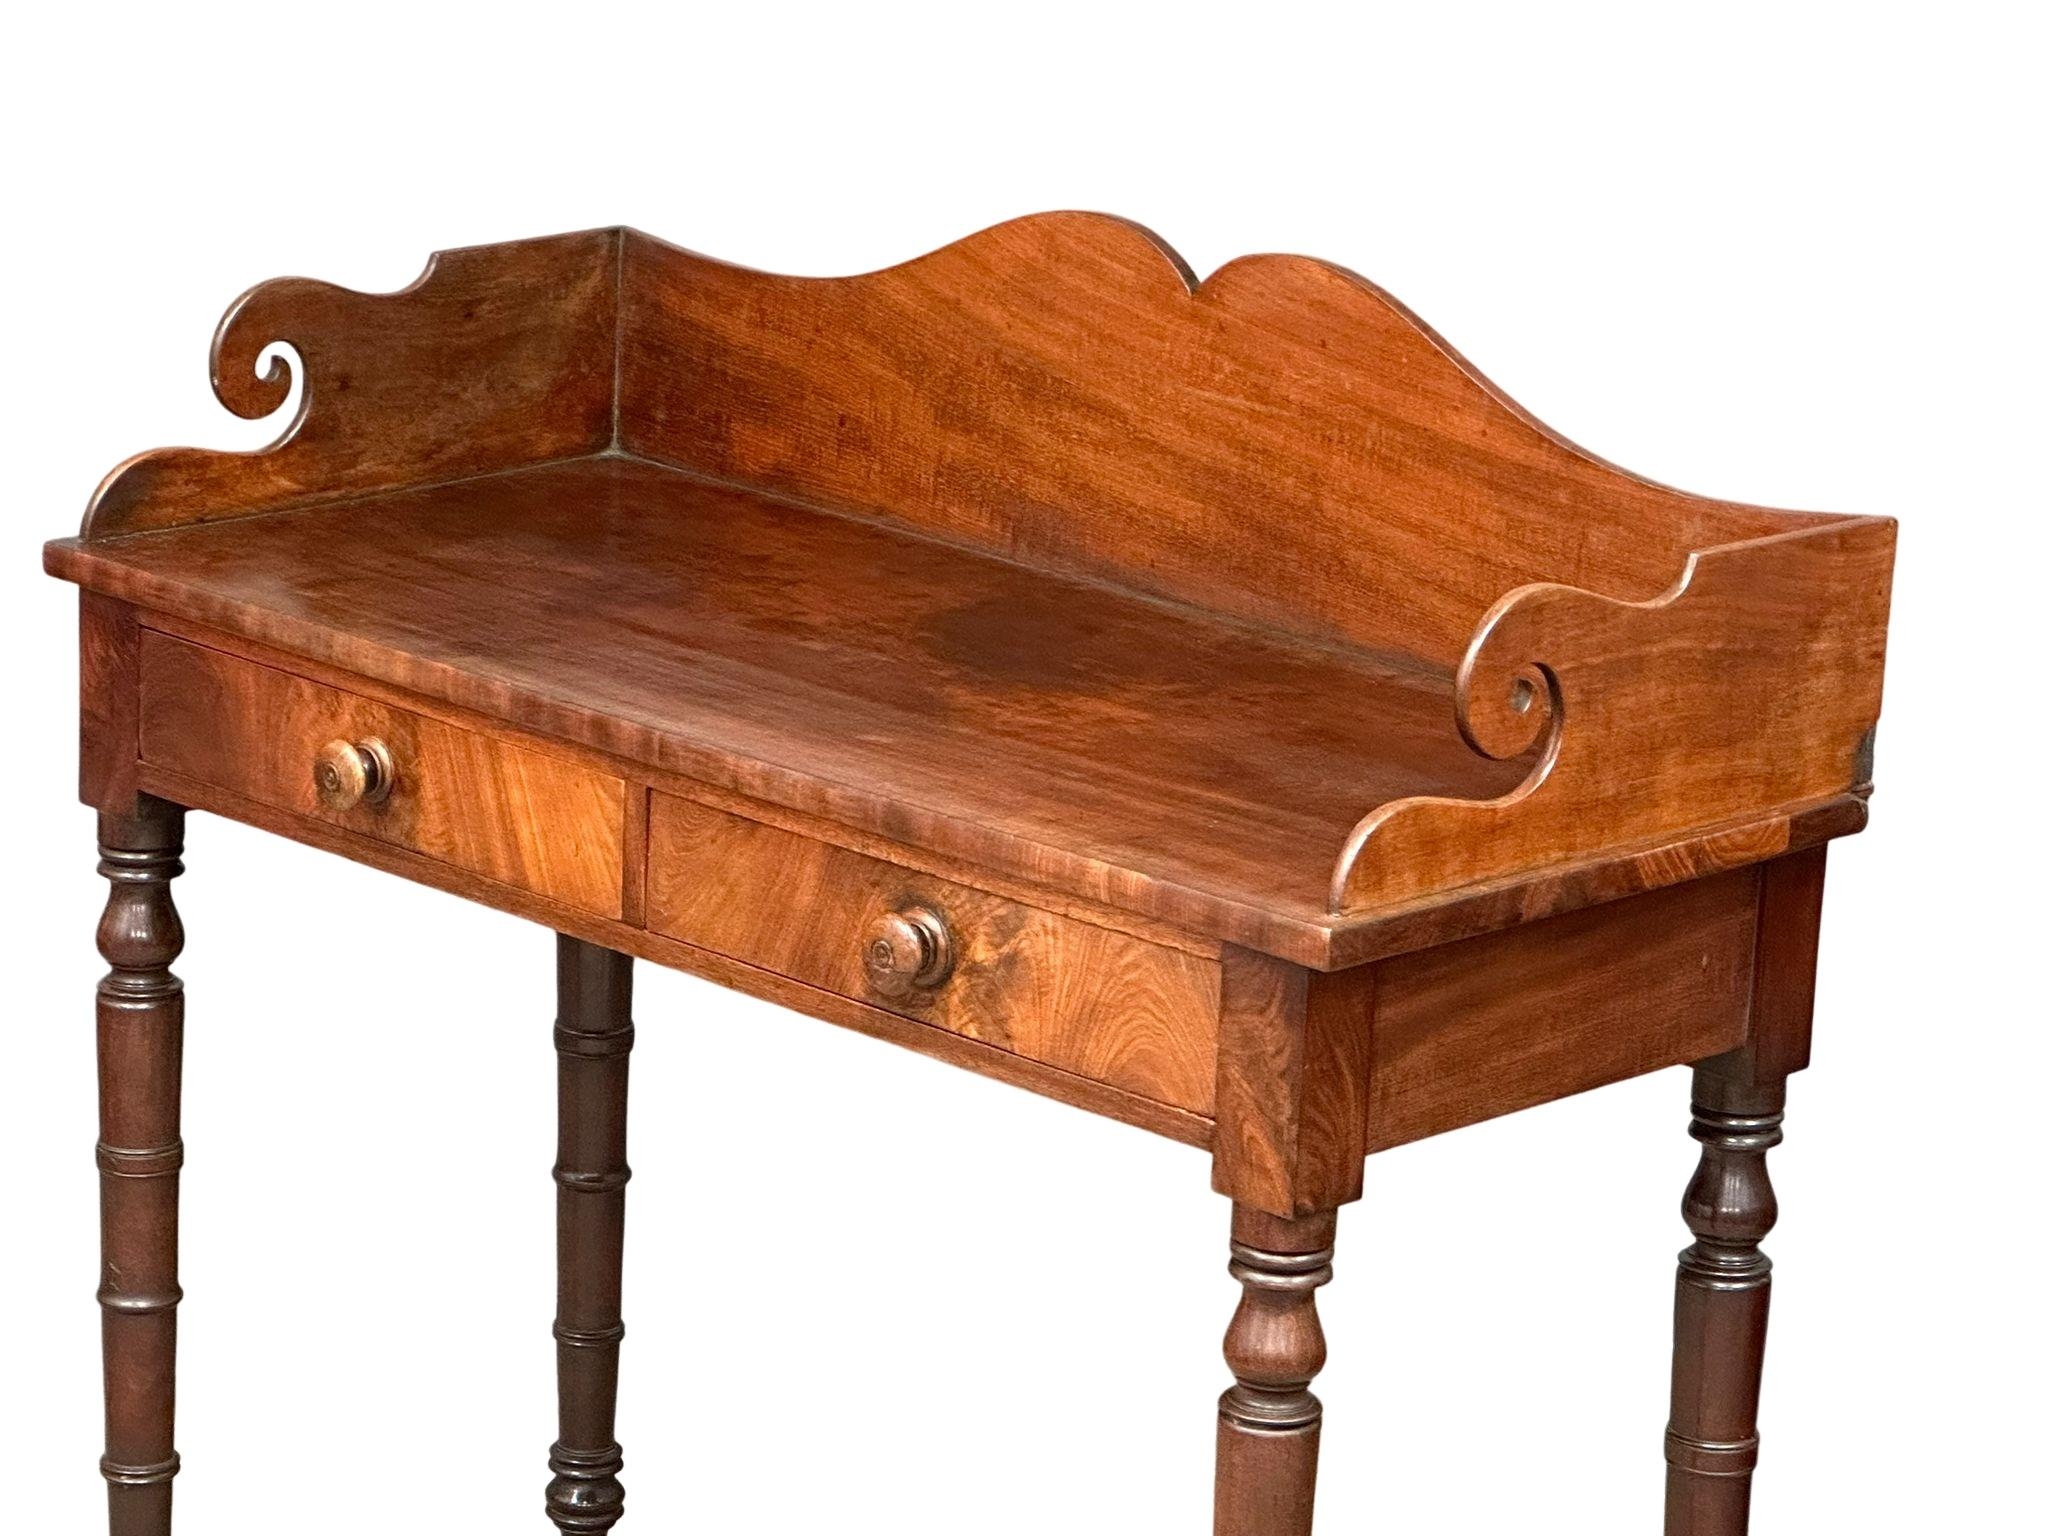 A late George IV mahogany gallery back side table on reeded legs, containing 2 front facing drawers. - Image 8 of 10